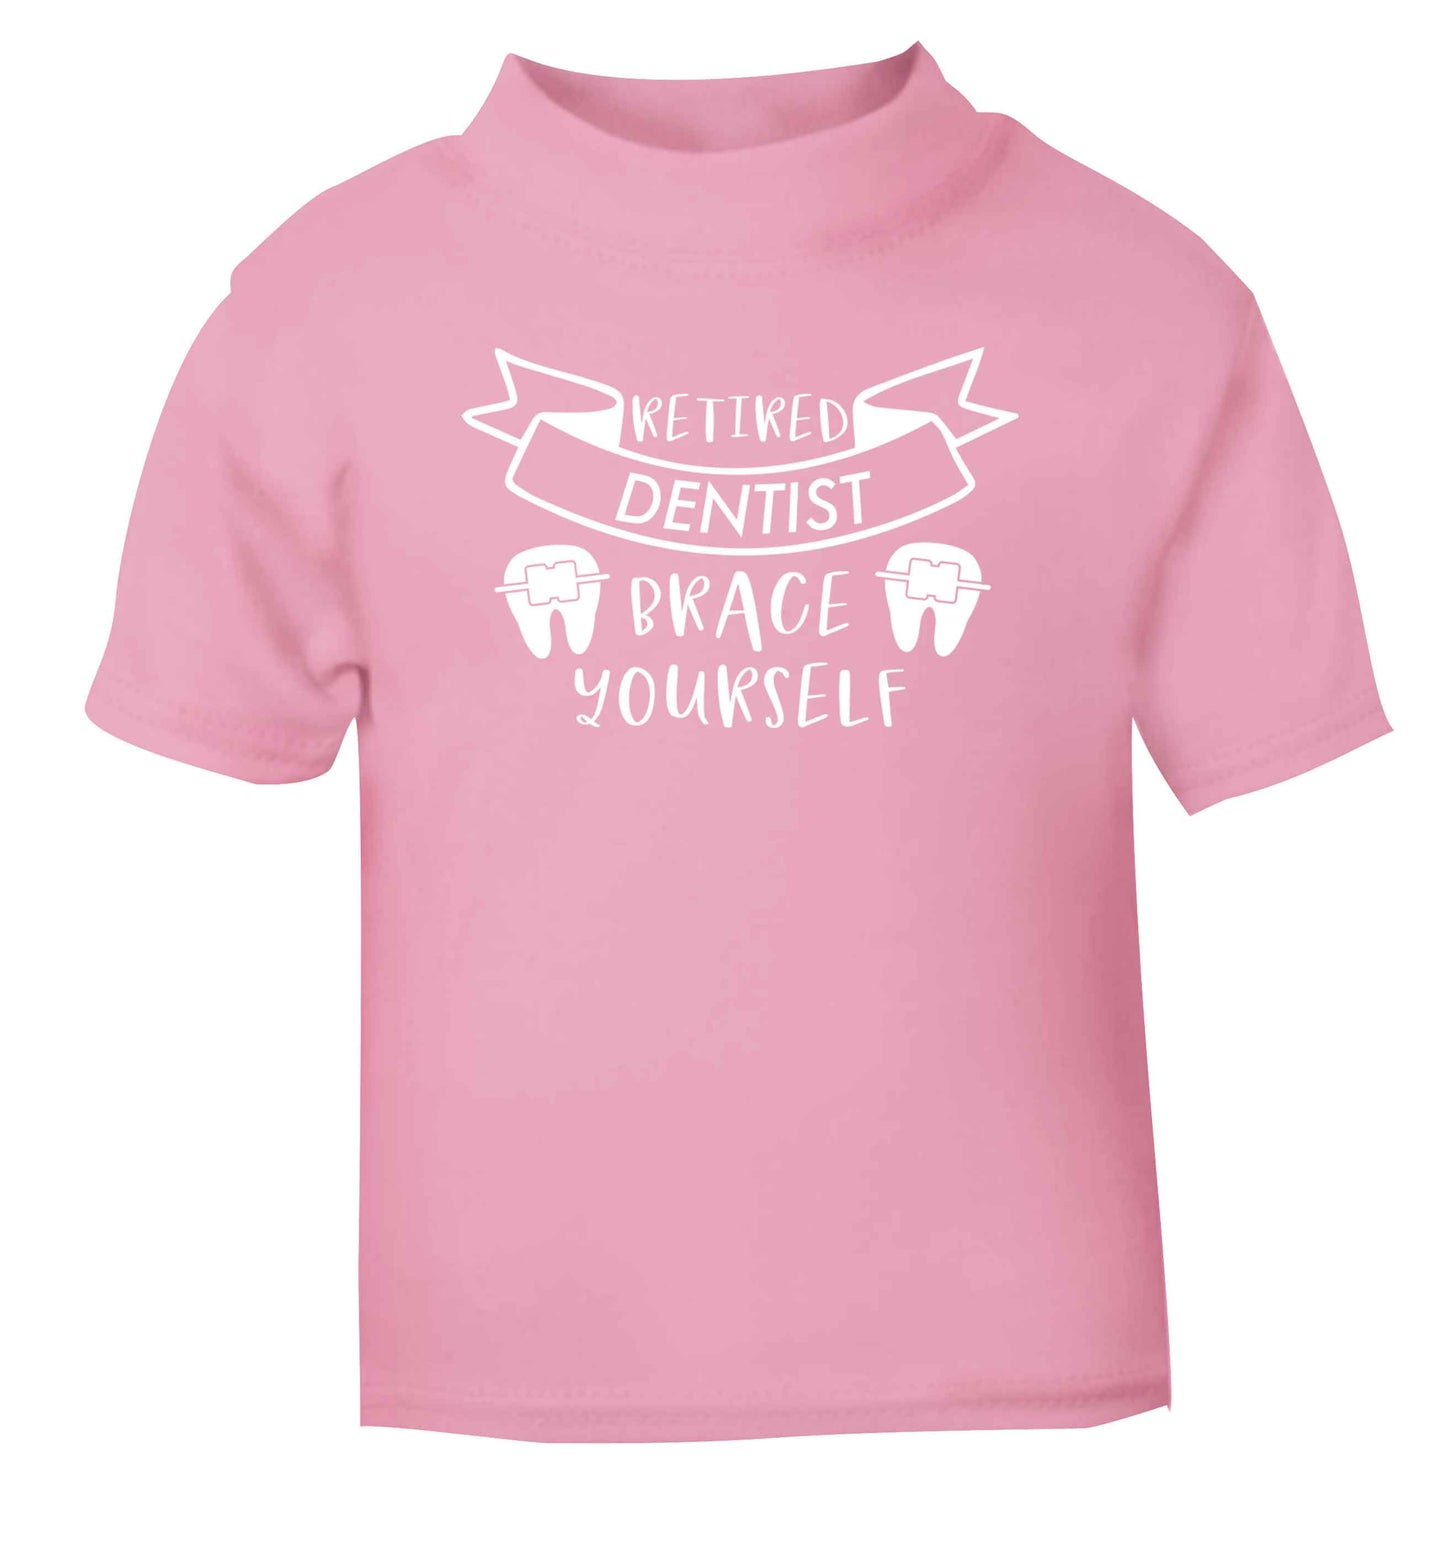 Retired dentist brace yourself light pink Baby Toddler Tshirt 2 Years